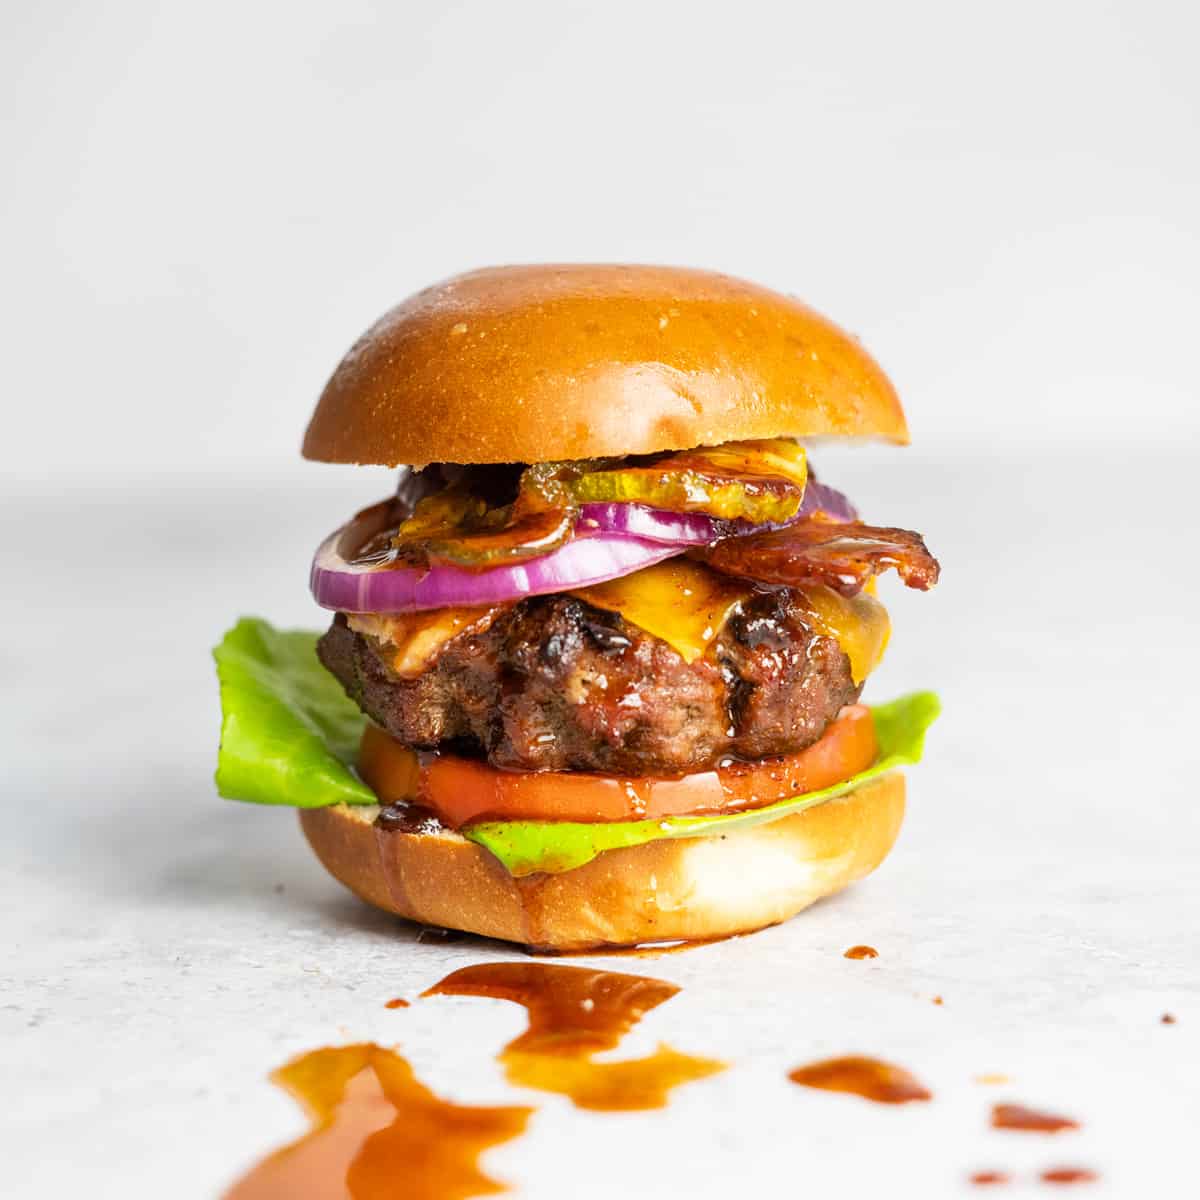 bbq burger with dripping bbq sauce on a white surface